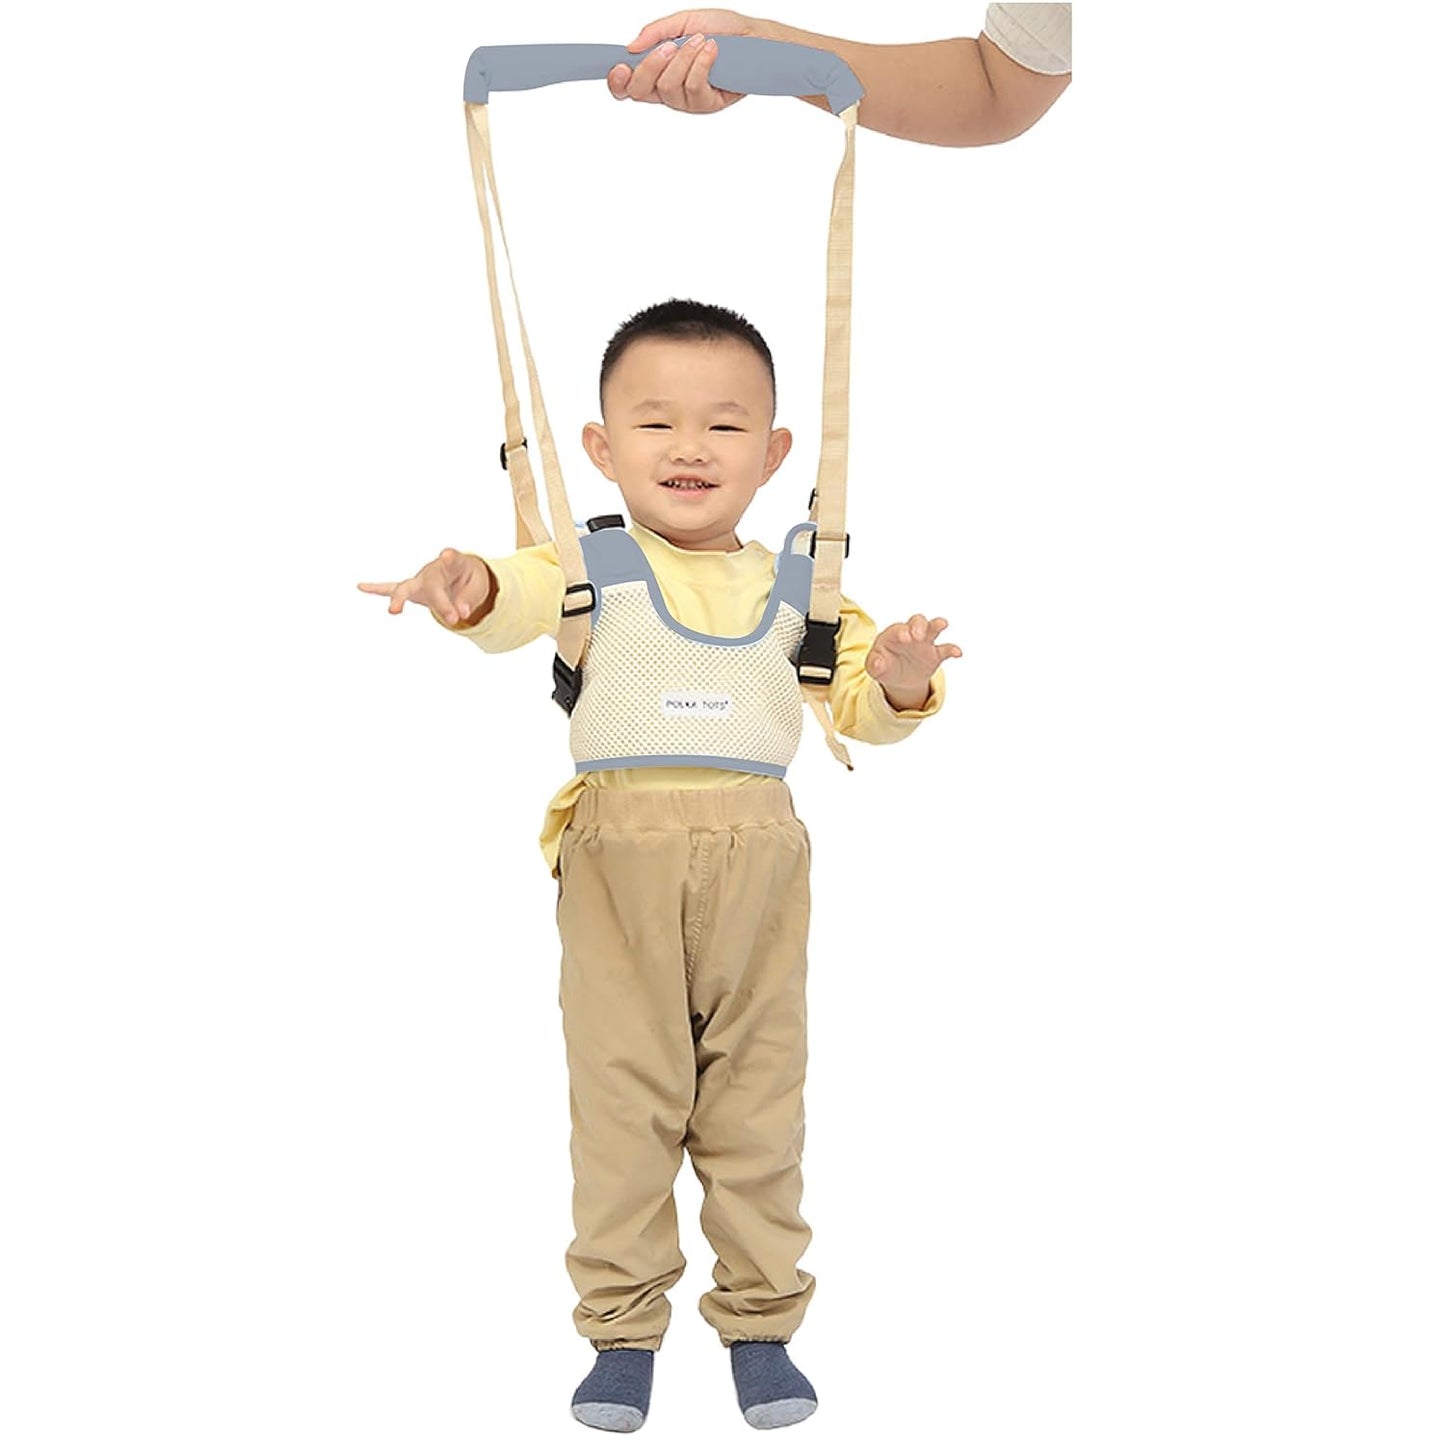 Polka Tots Baby Walking Assistant Harness Toddler Leash - Grey